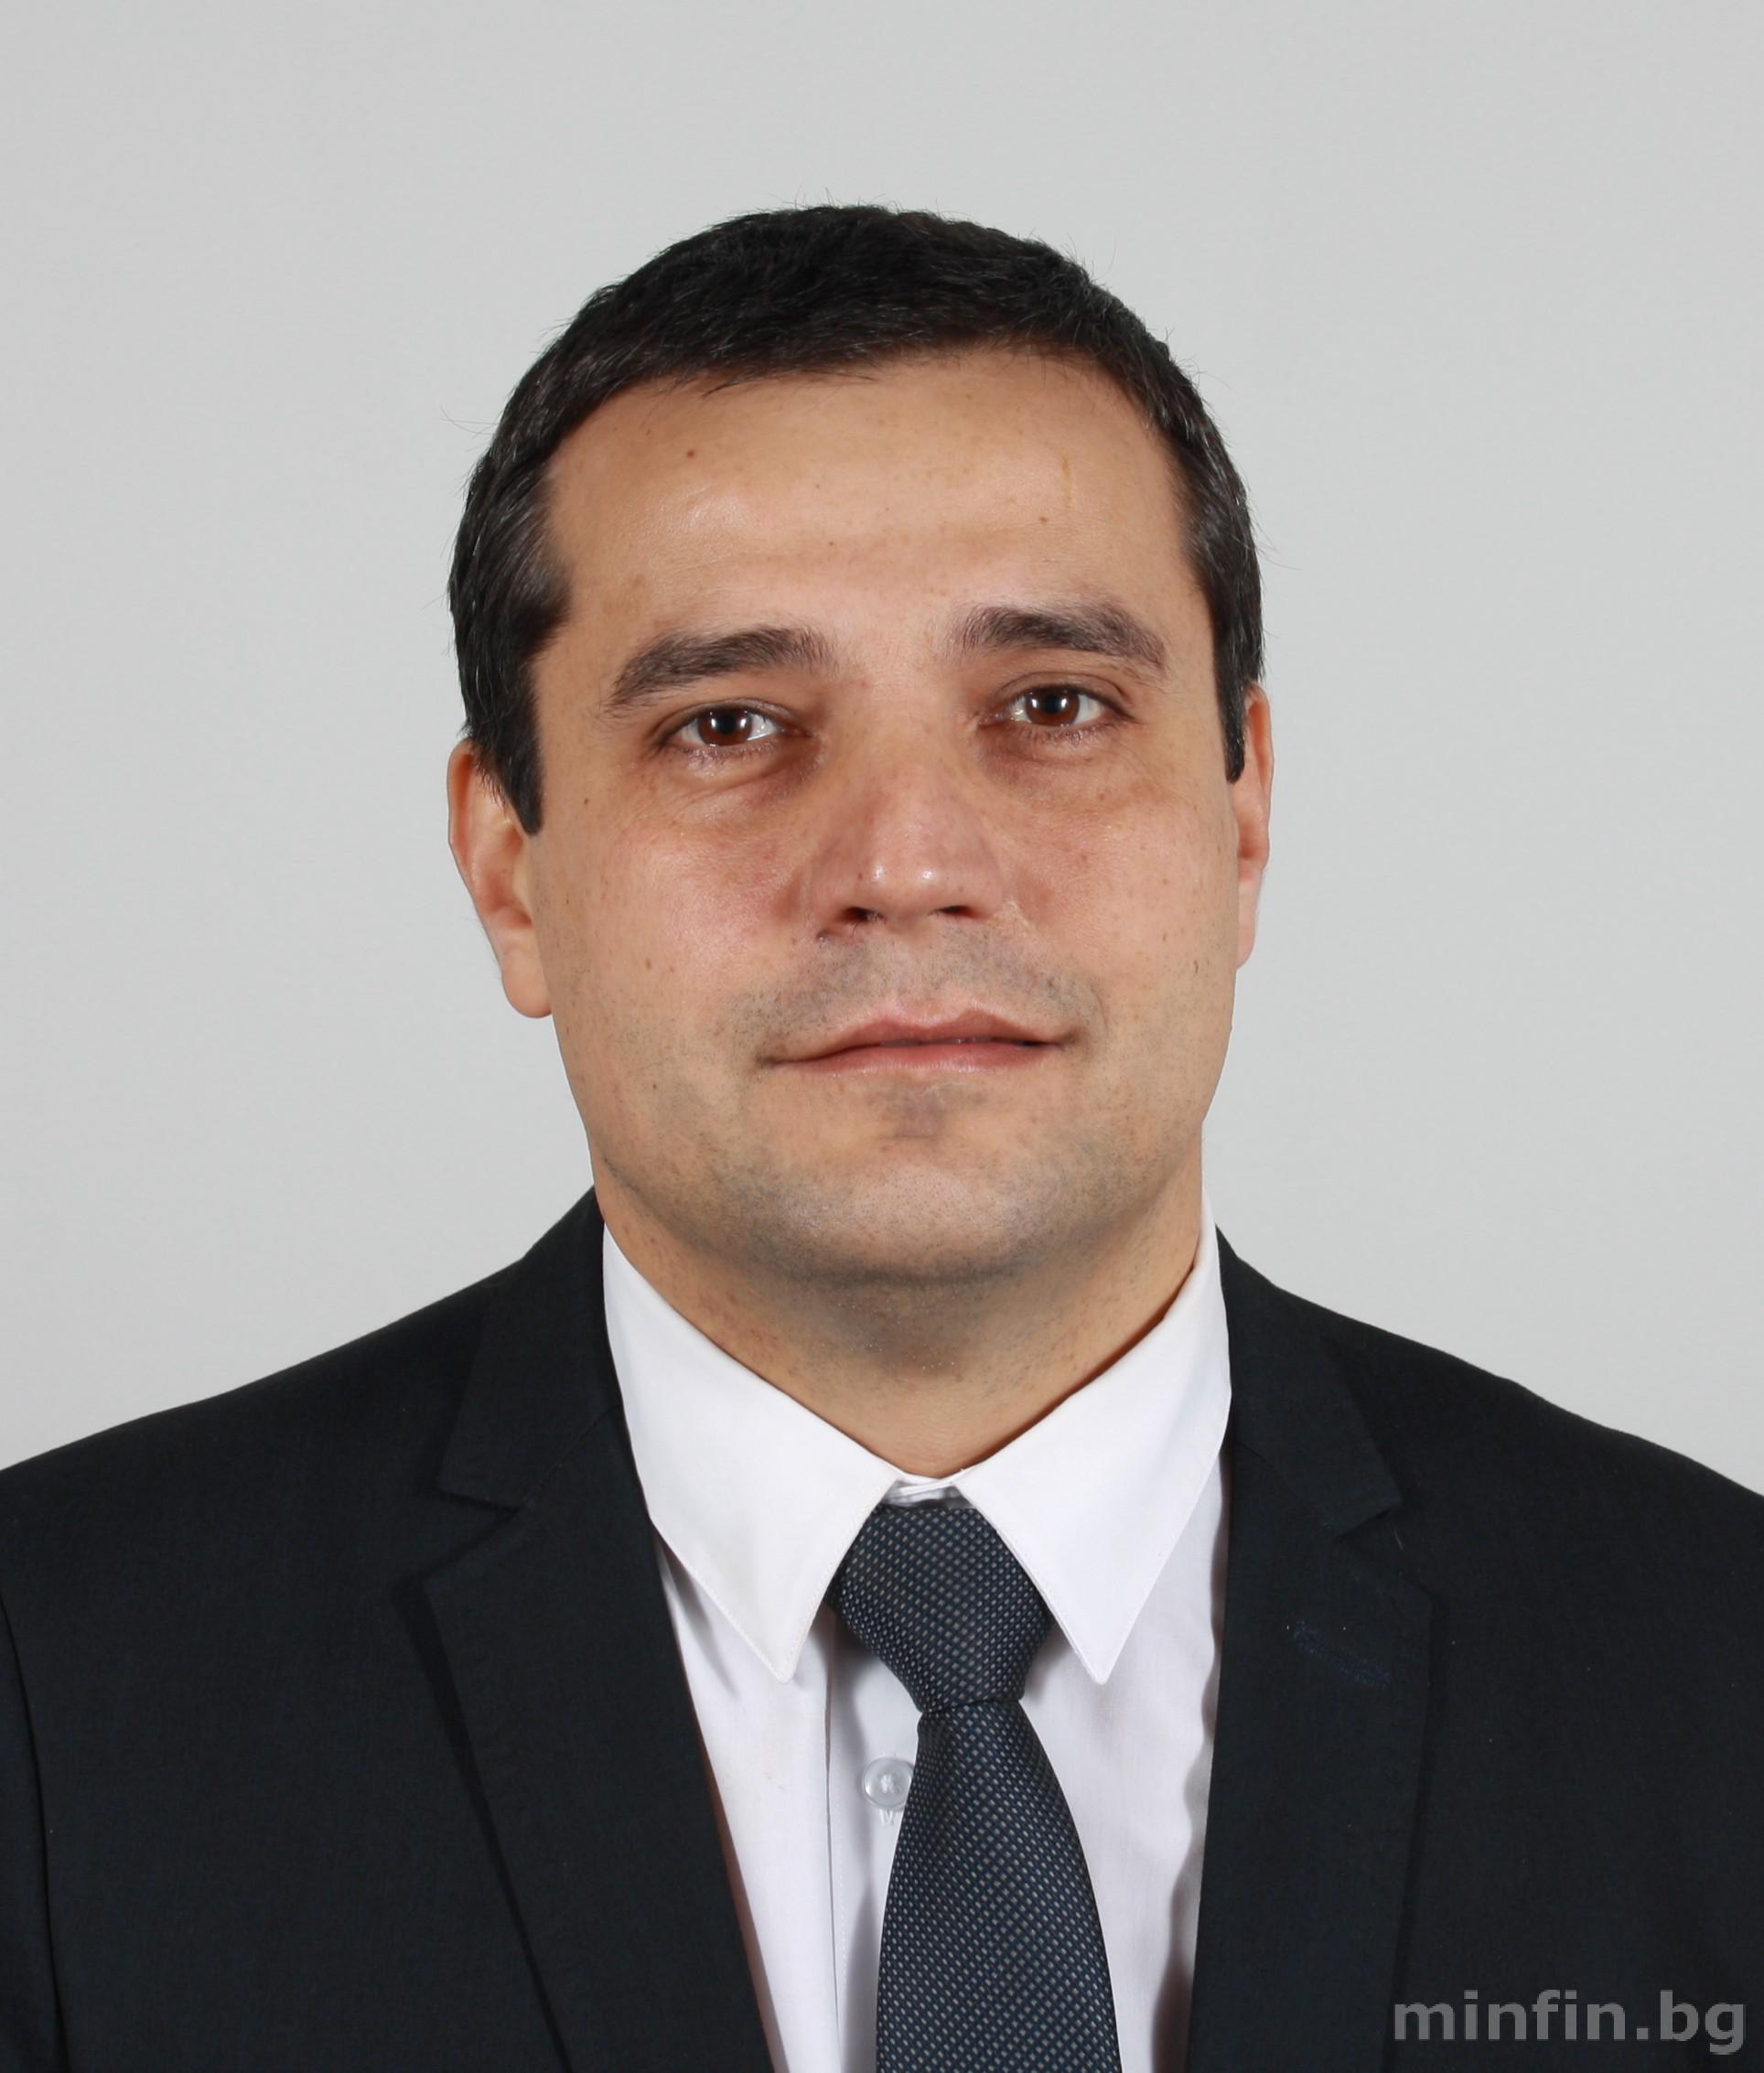 GEORGI NACHEV IS THE NEW DIRECTOR OF THE PUBLIC FINANCIAL INSPECTION AGENCY